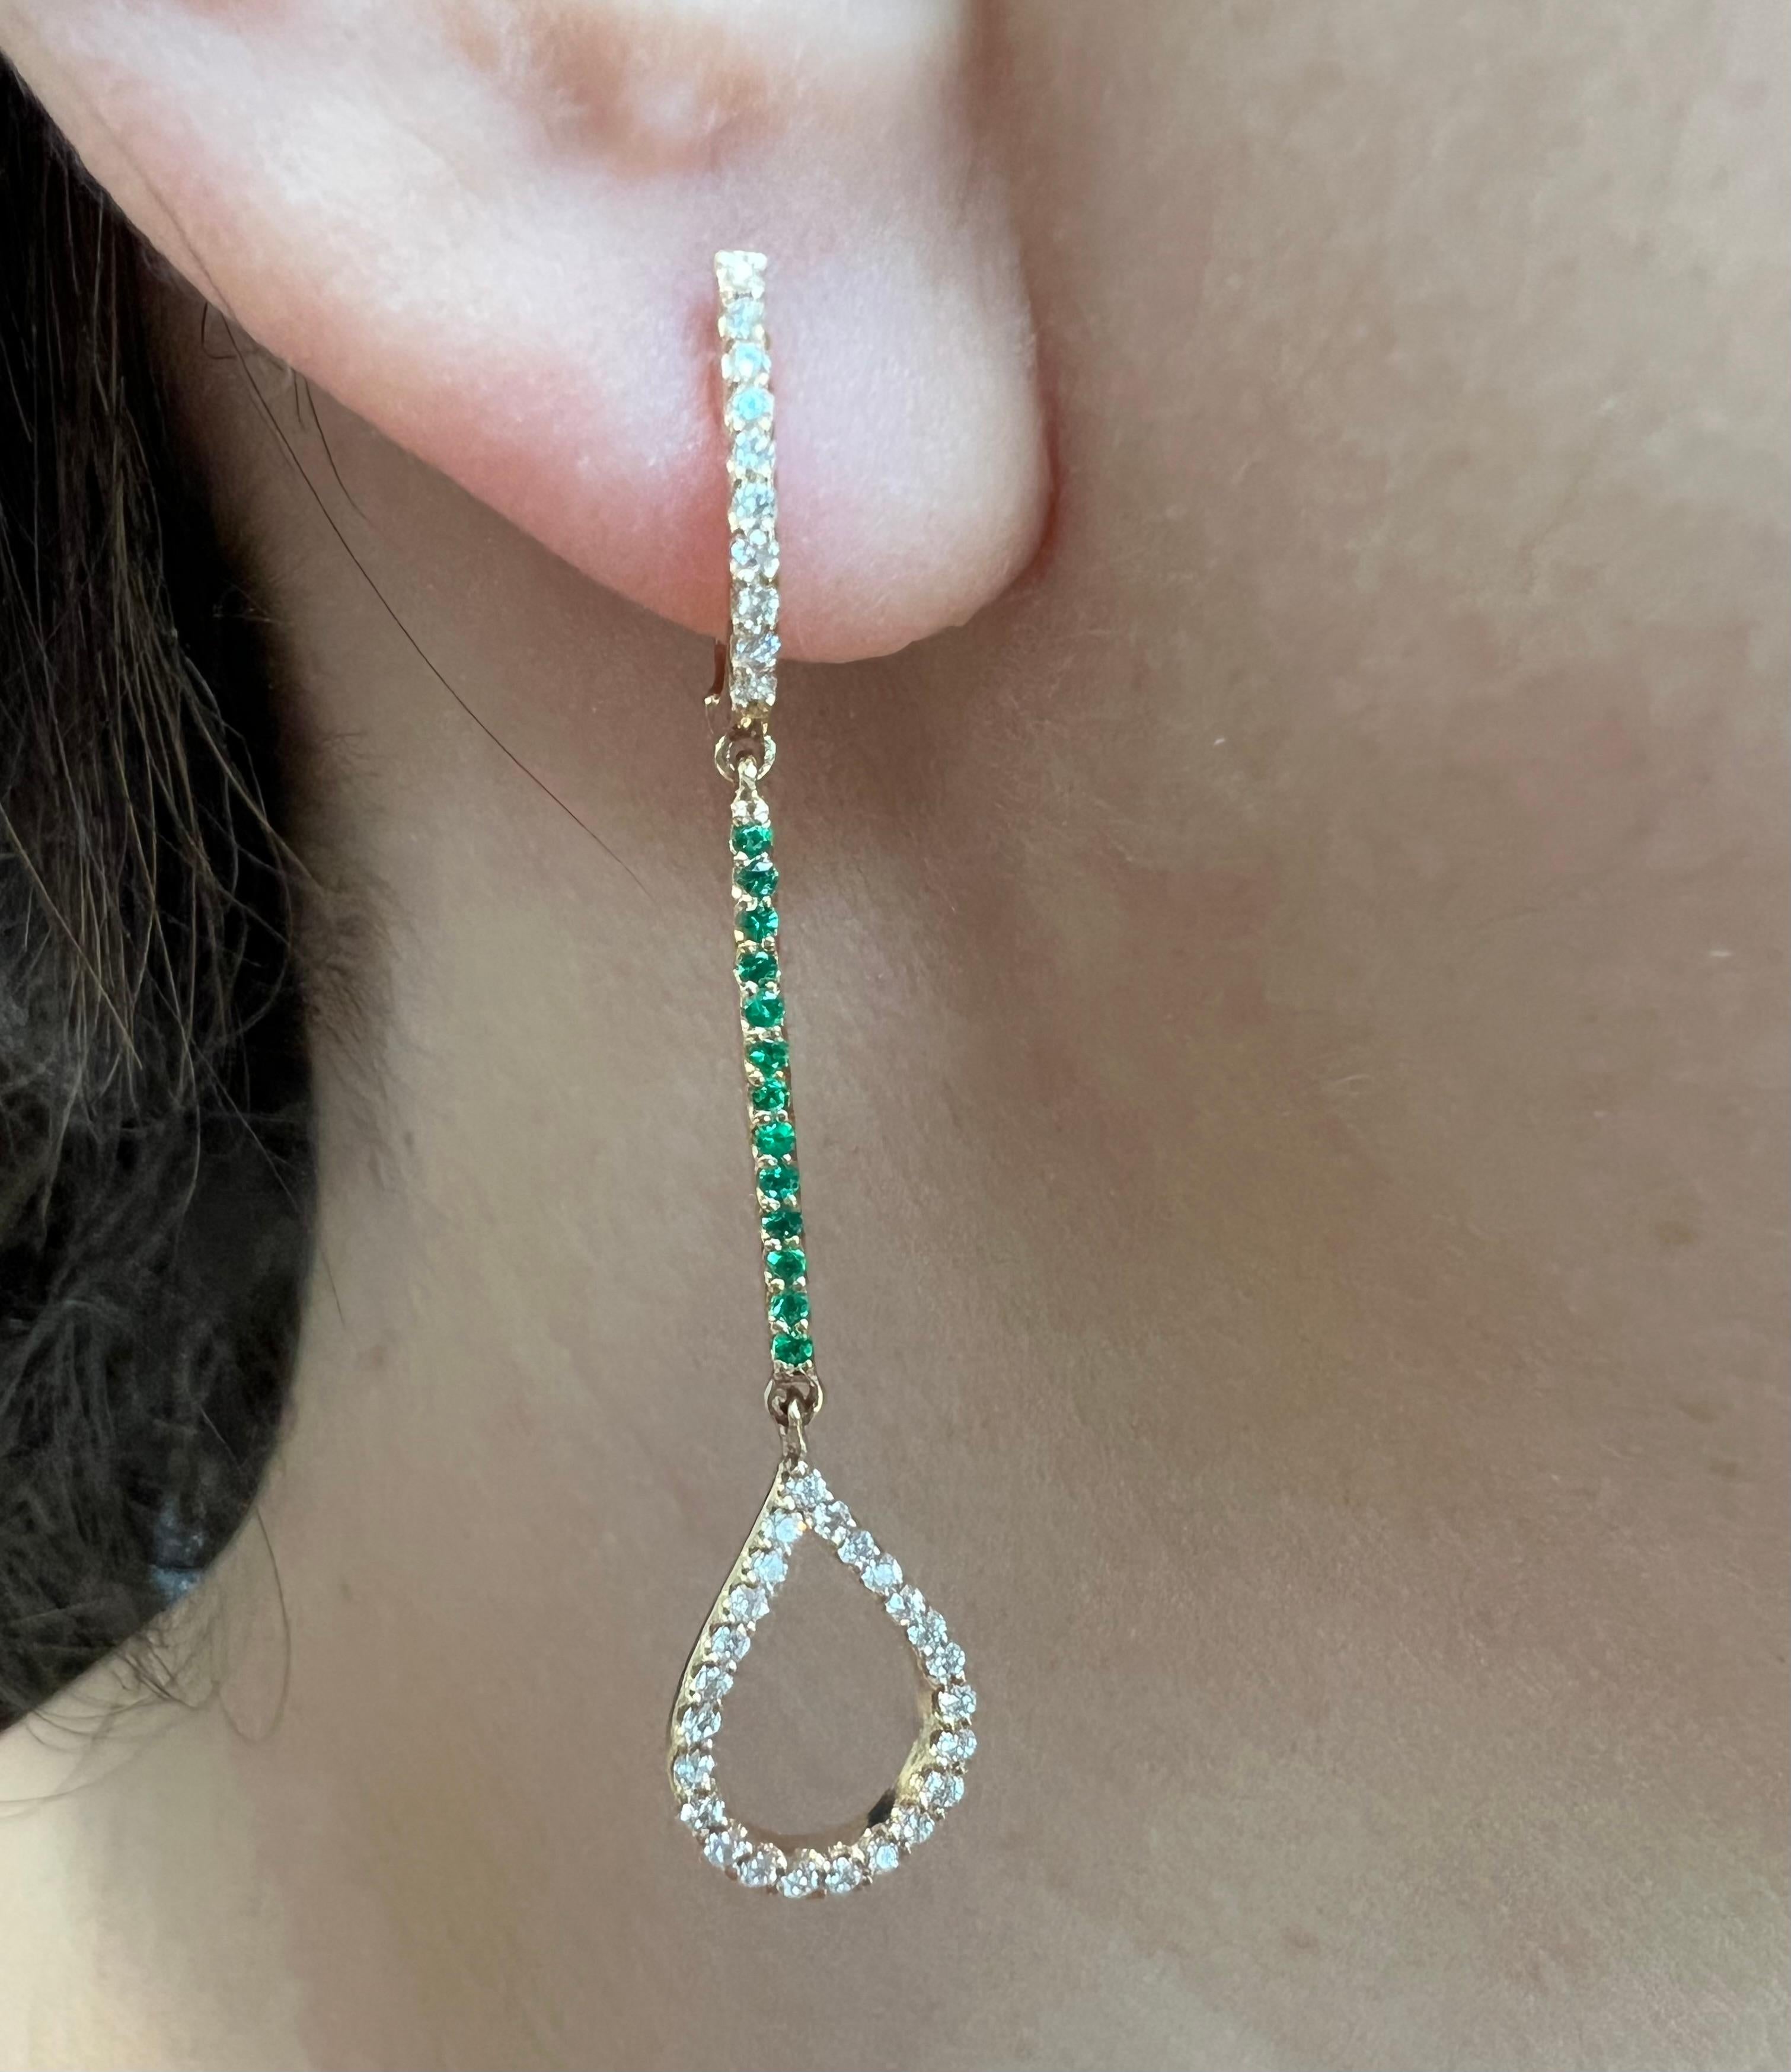 Crafted in 14K yellow gold this stunning dangle earring takes the form of a teardrop, with a whole host of deep green emeralds and shimmering round diamonds delicately lining its form. Lightweight, yet still a major statement piece, this earring is